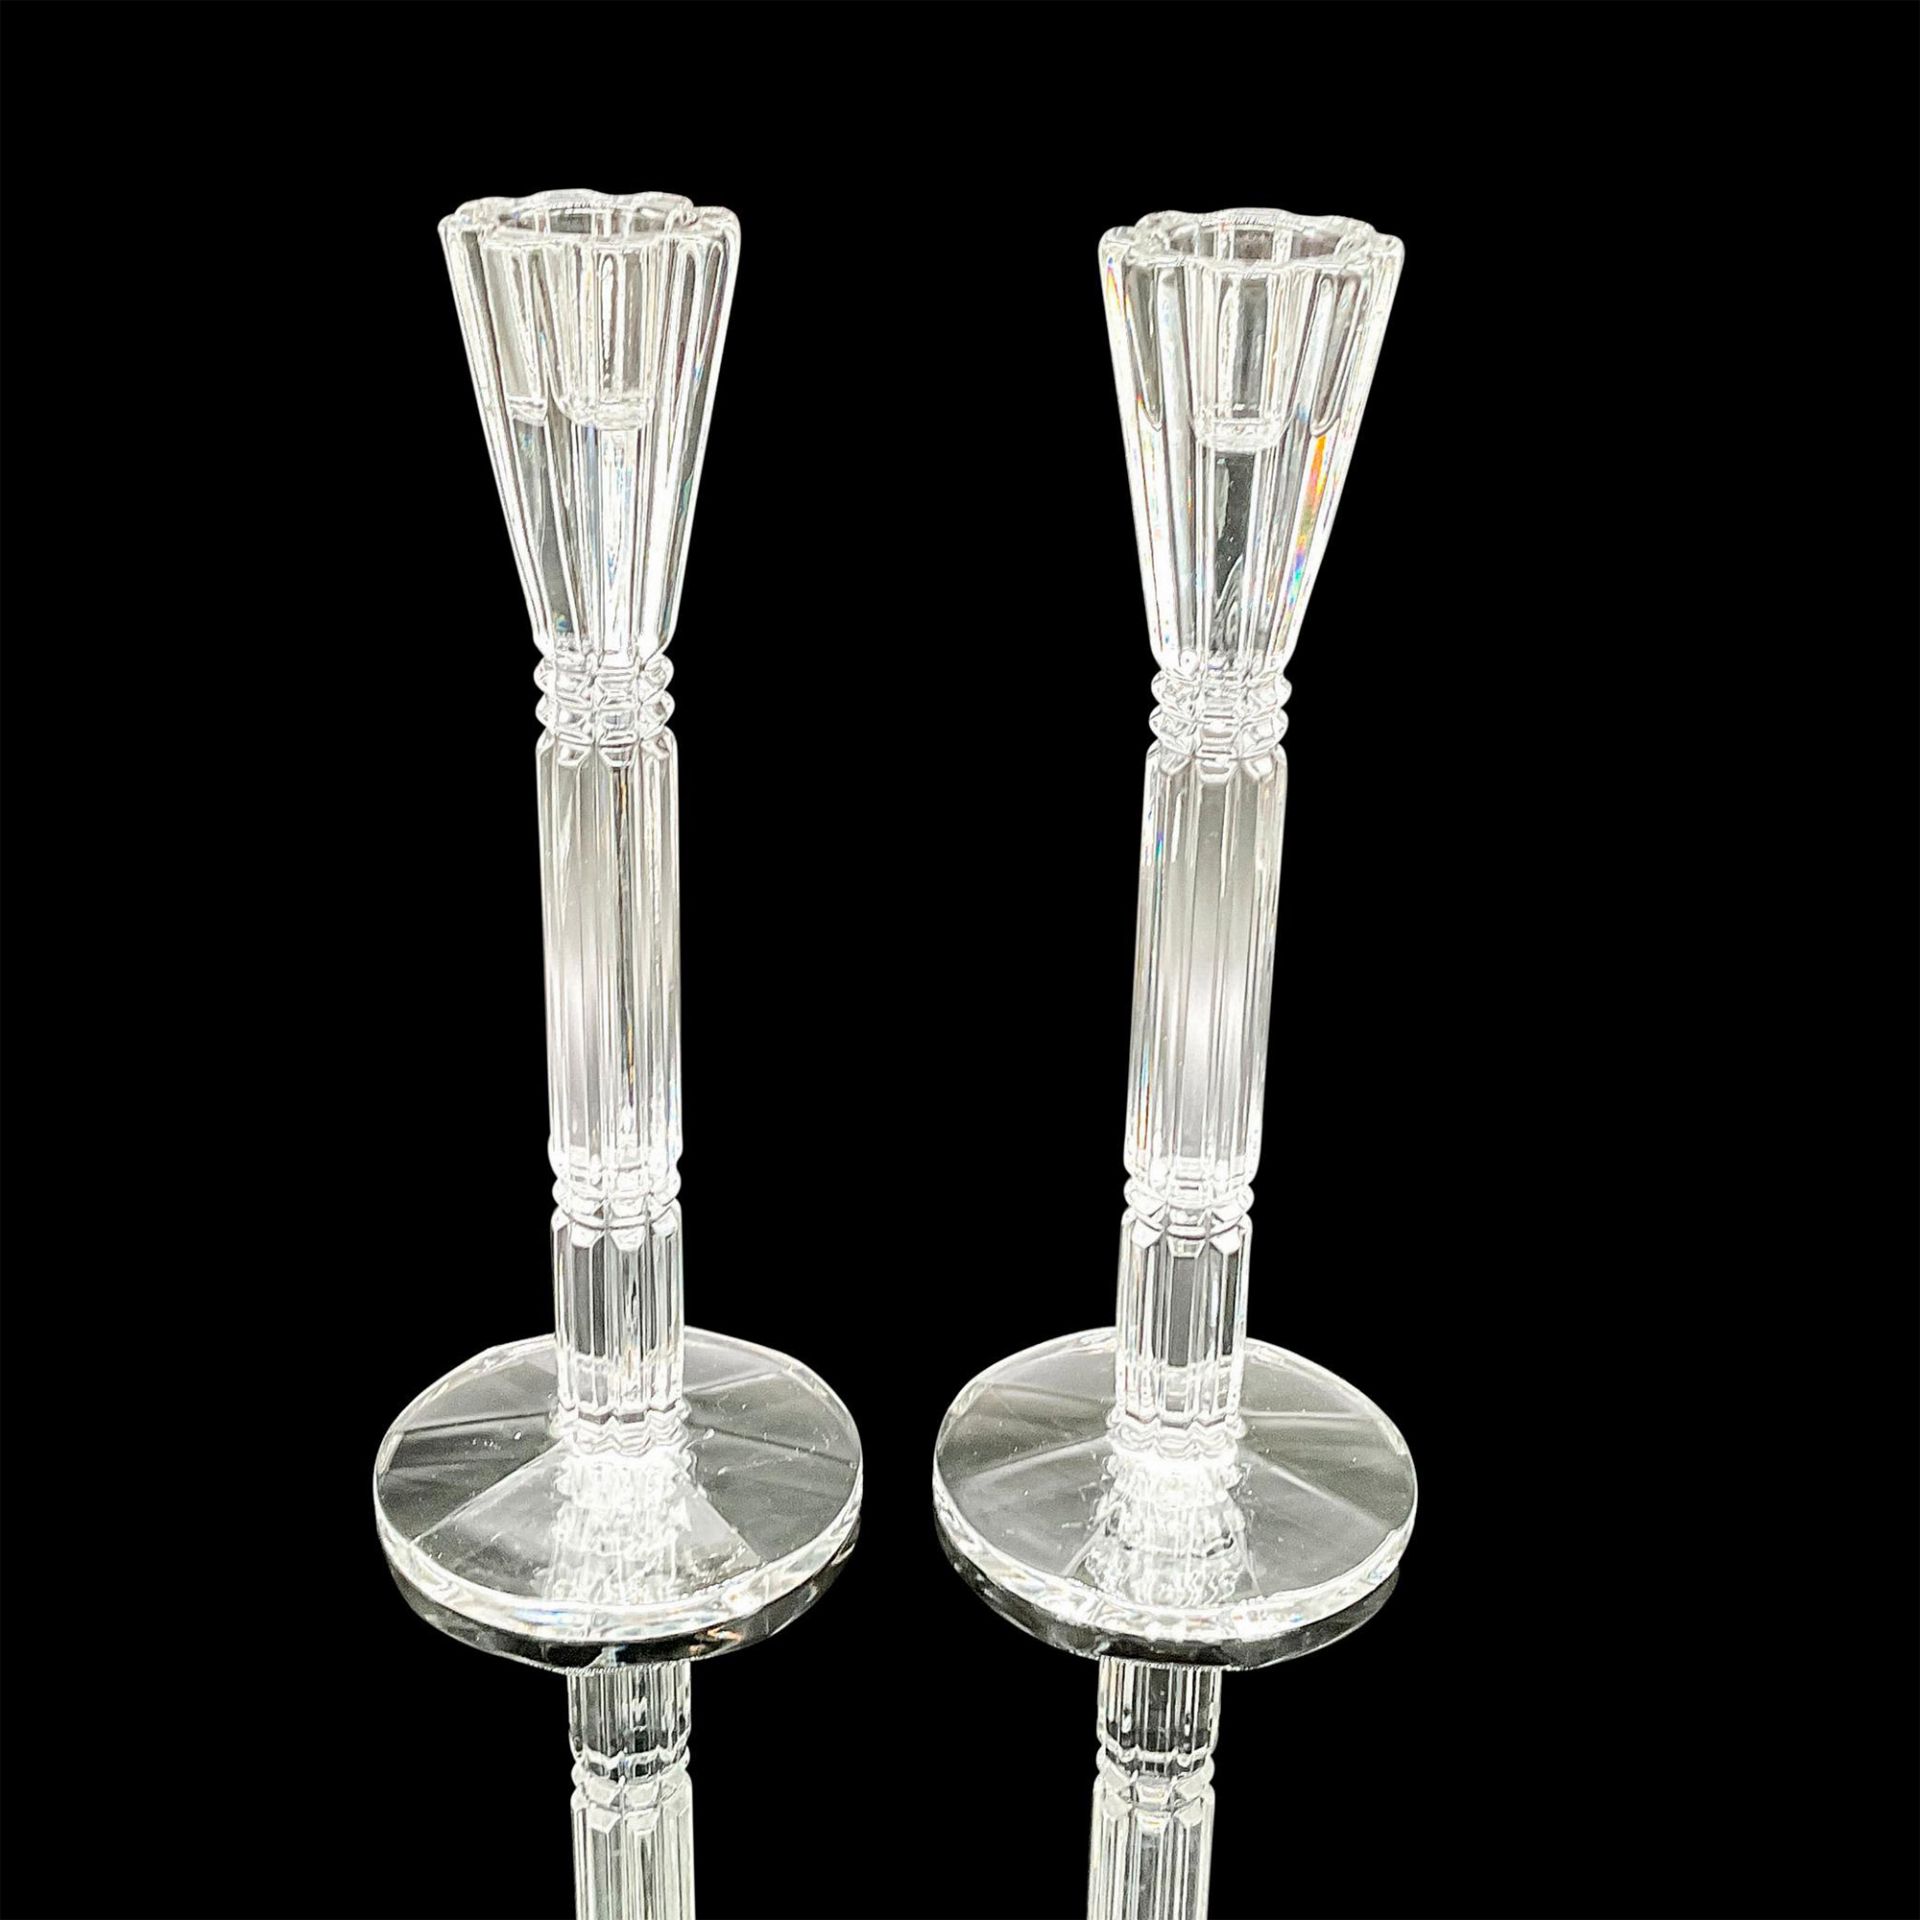 Pair of Vintage Glass Candlestick Holders - Image 2 of 3